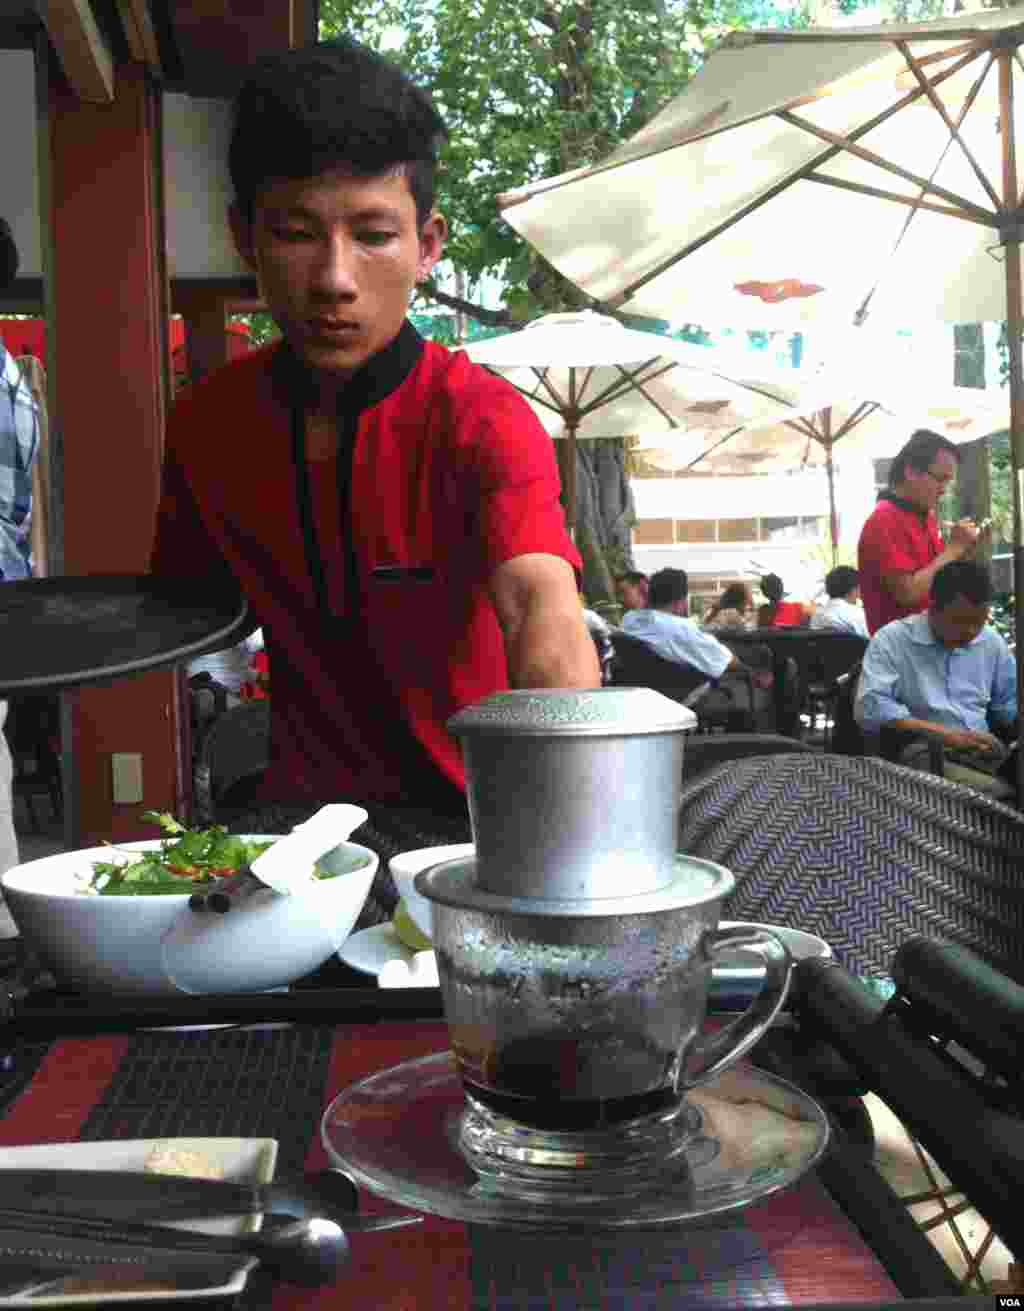 A waiter serves Vietnamese-style coffee in Ho Chi Minh City. (D. Schearf/VOA)